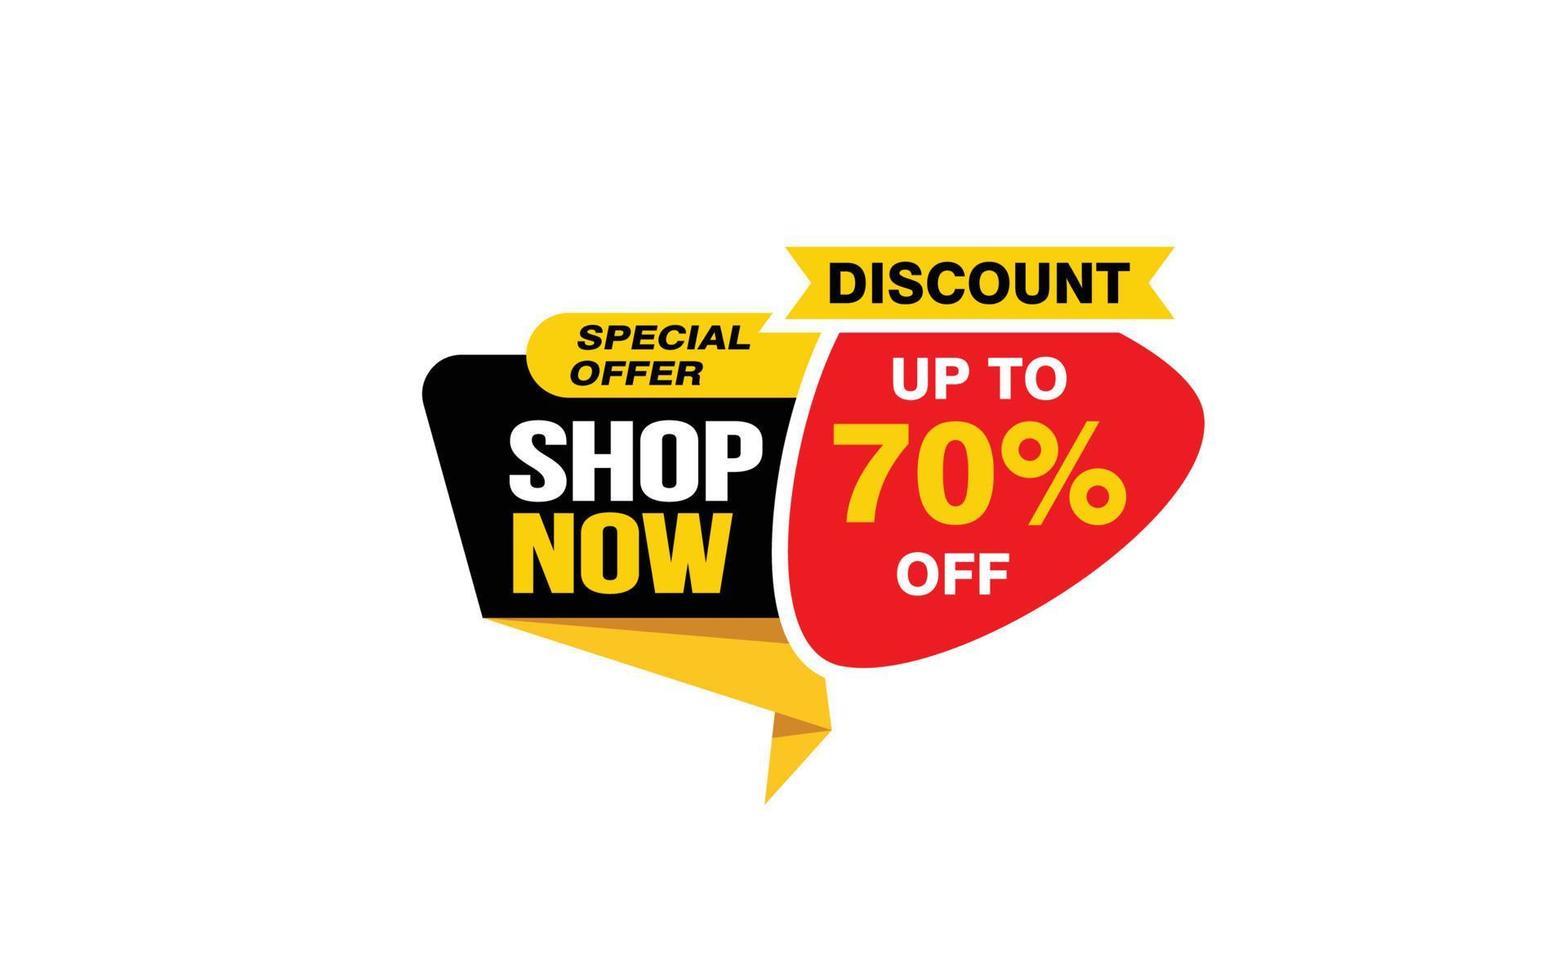 70 Percent SHOP NOW offer, clearance, promotion banner layout with sticker style. vector